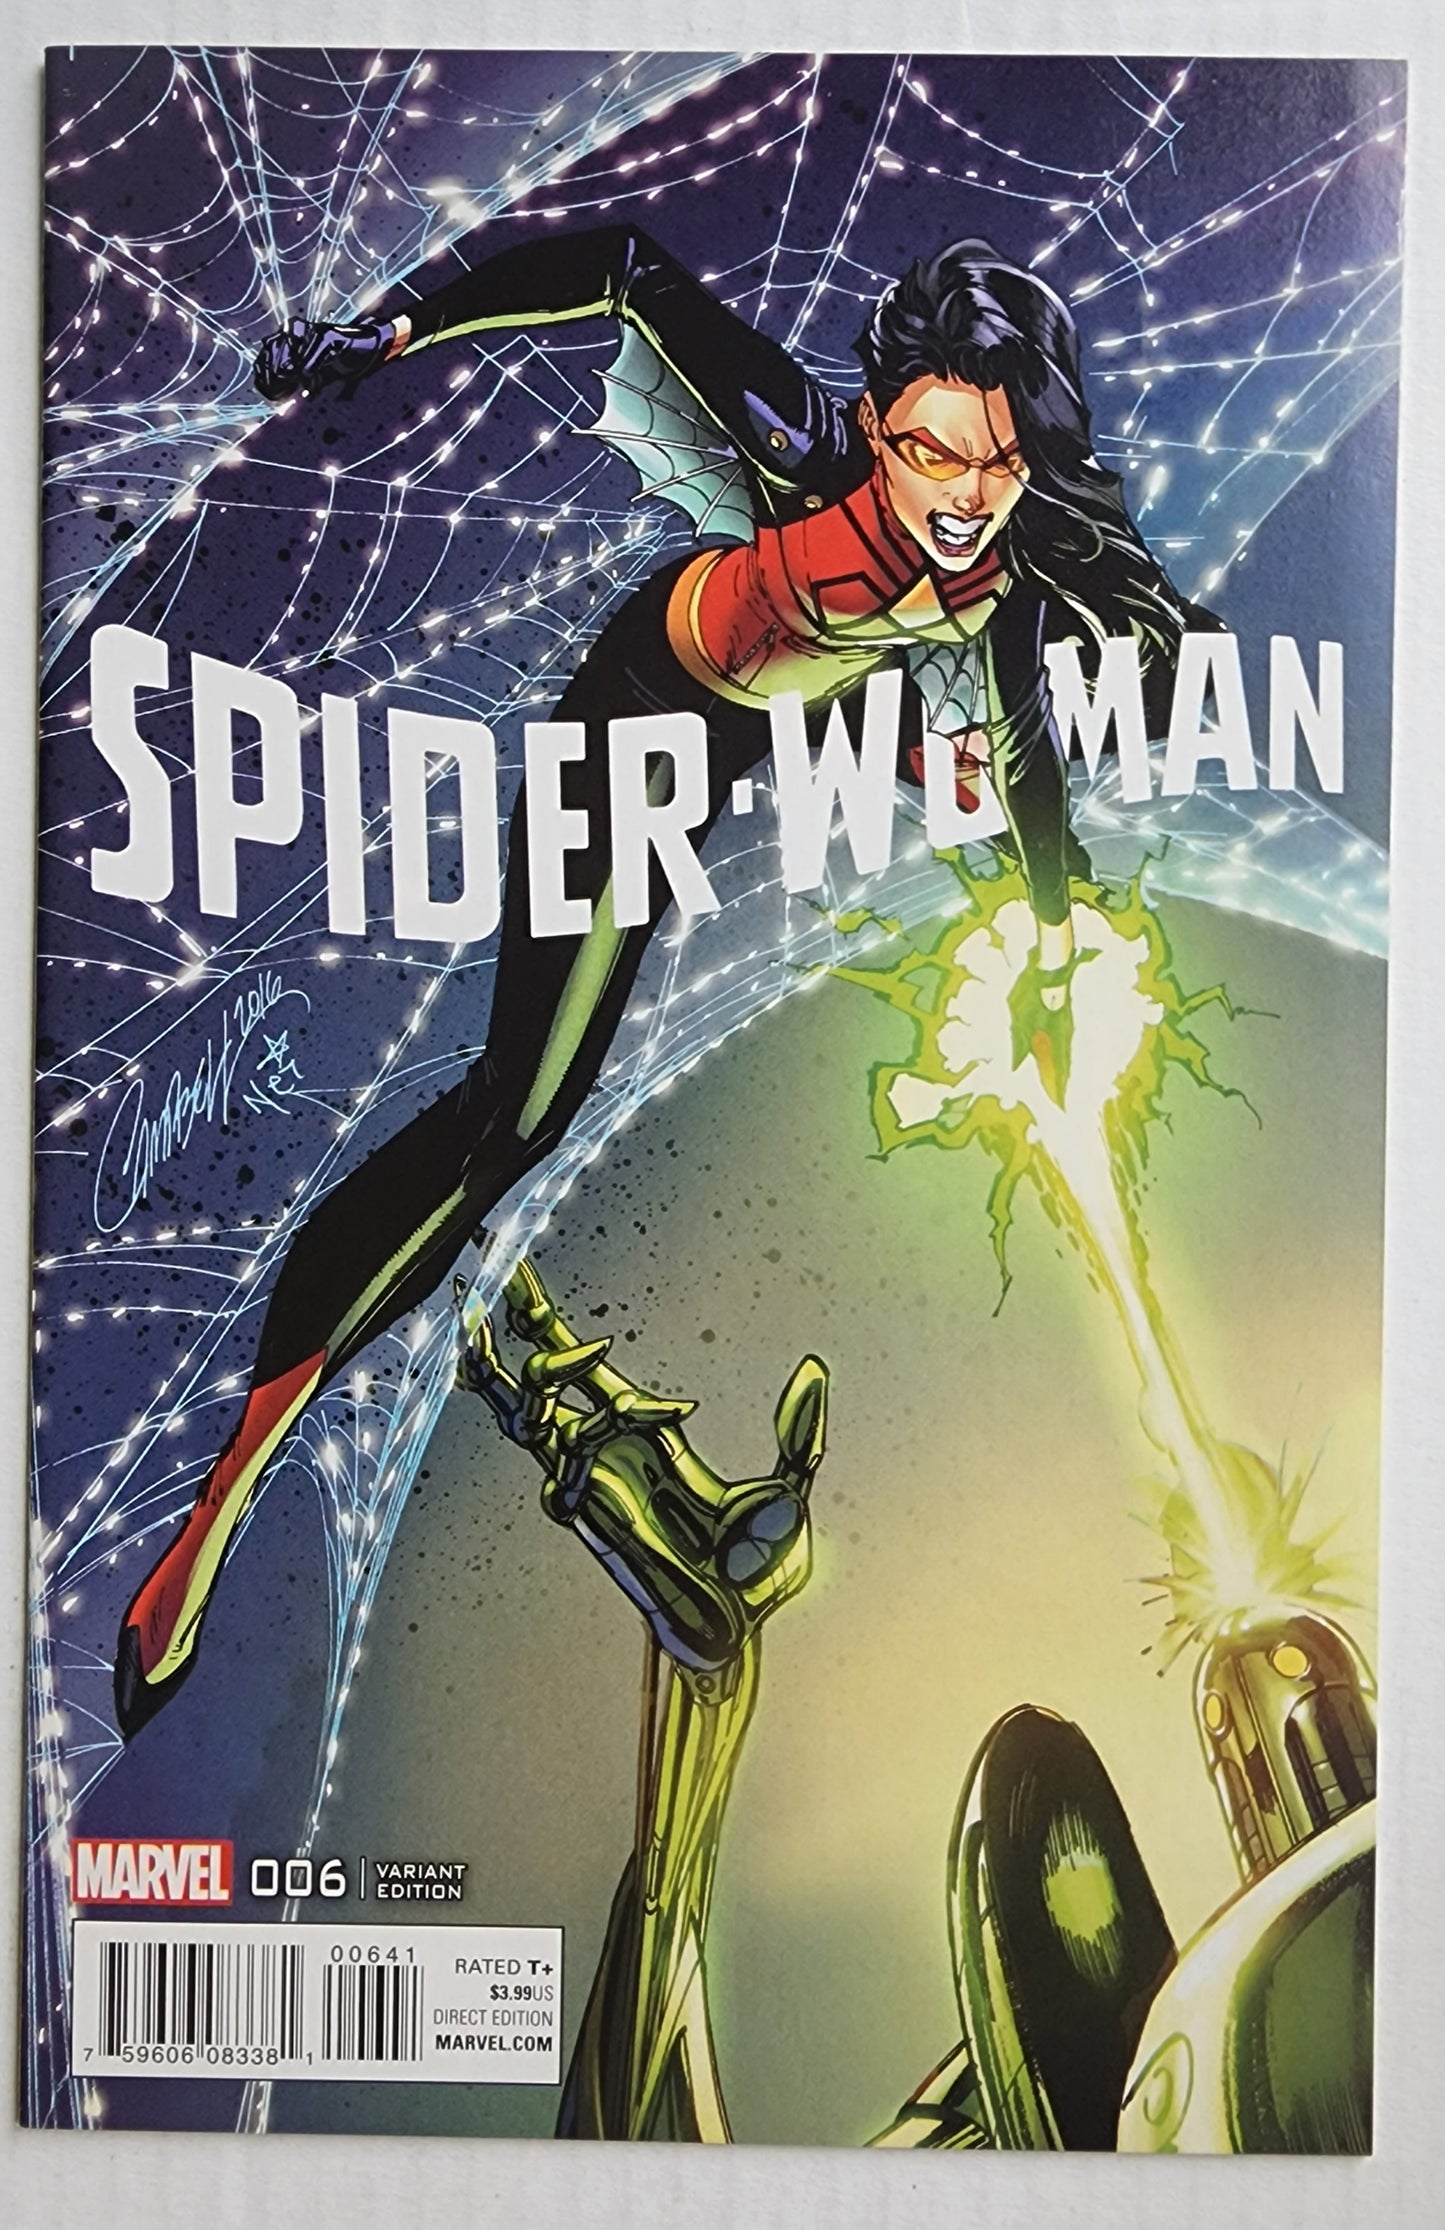 SPIDER-WOMAN #6 J SCOTT CAMPBELL CONNECTING VARIANT